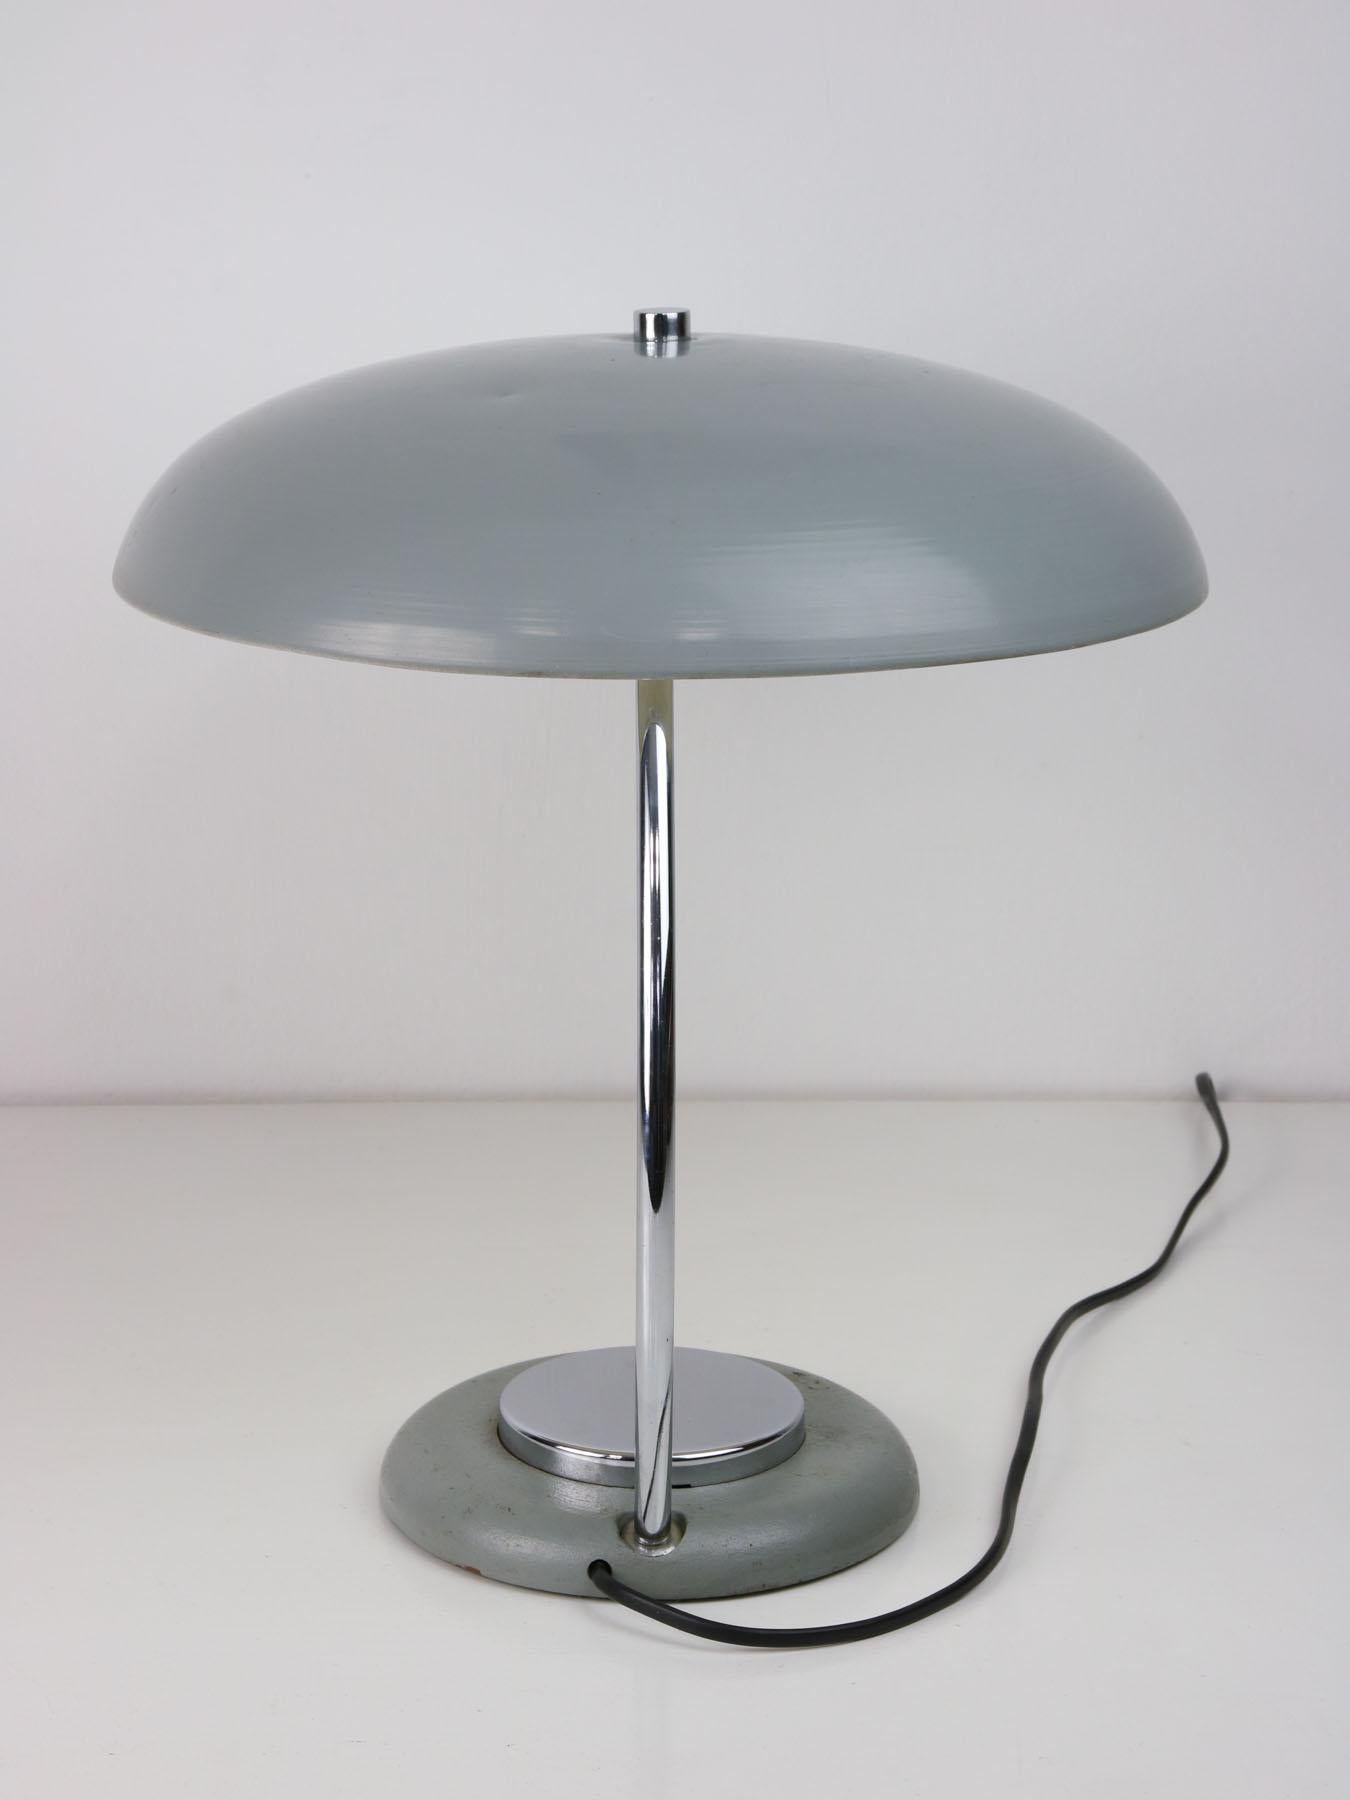 Bauhaus Saucer Table Lamp with Big Button For Sale 5